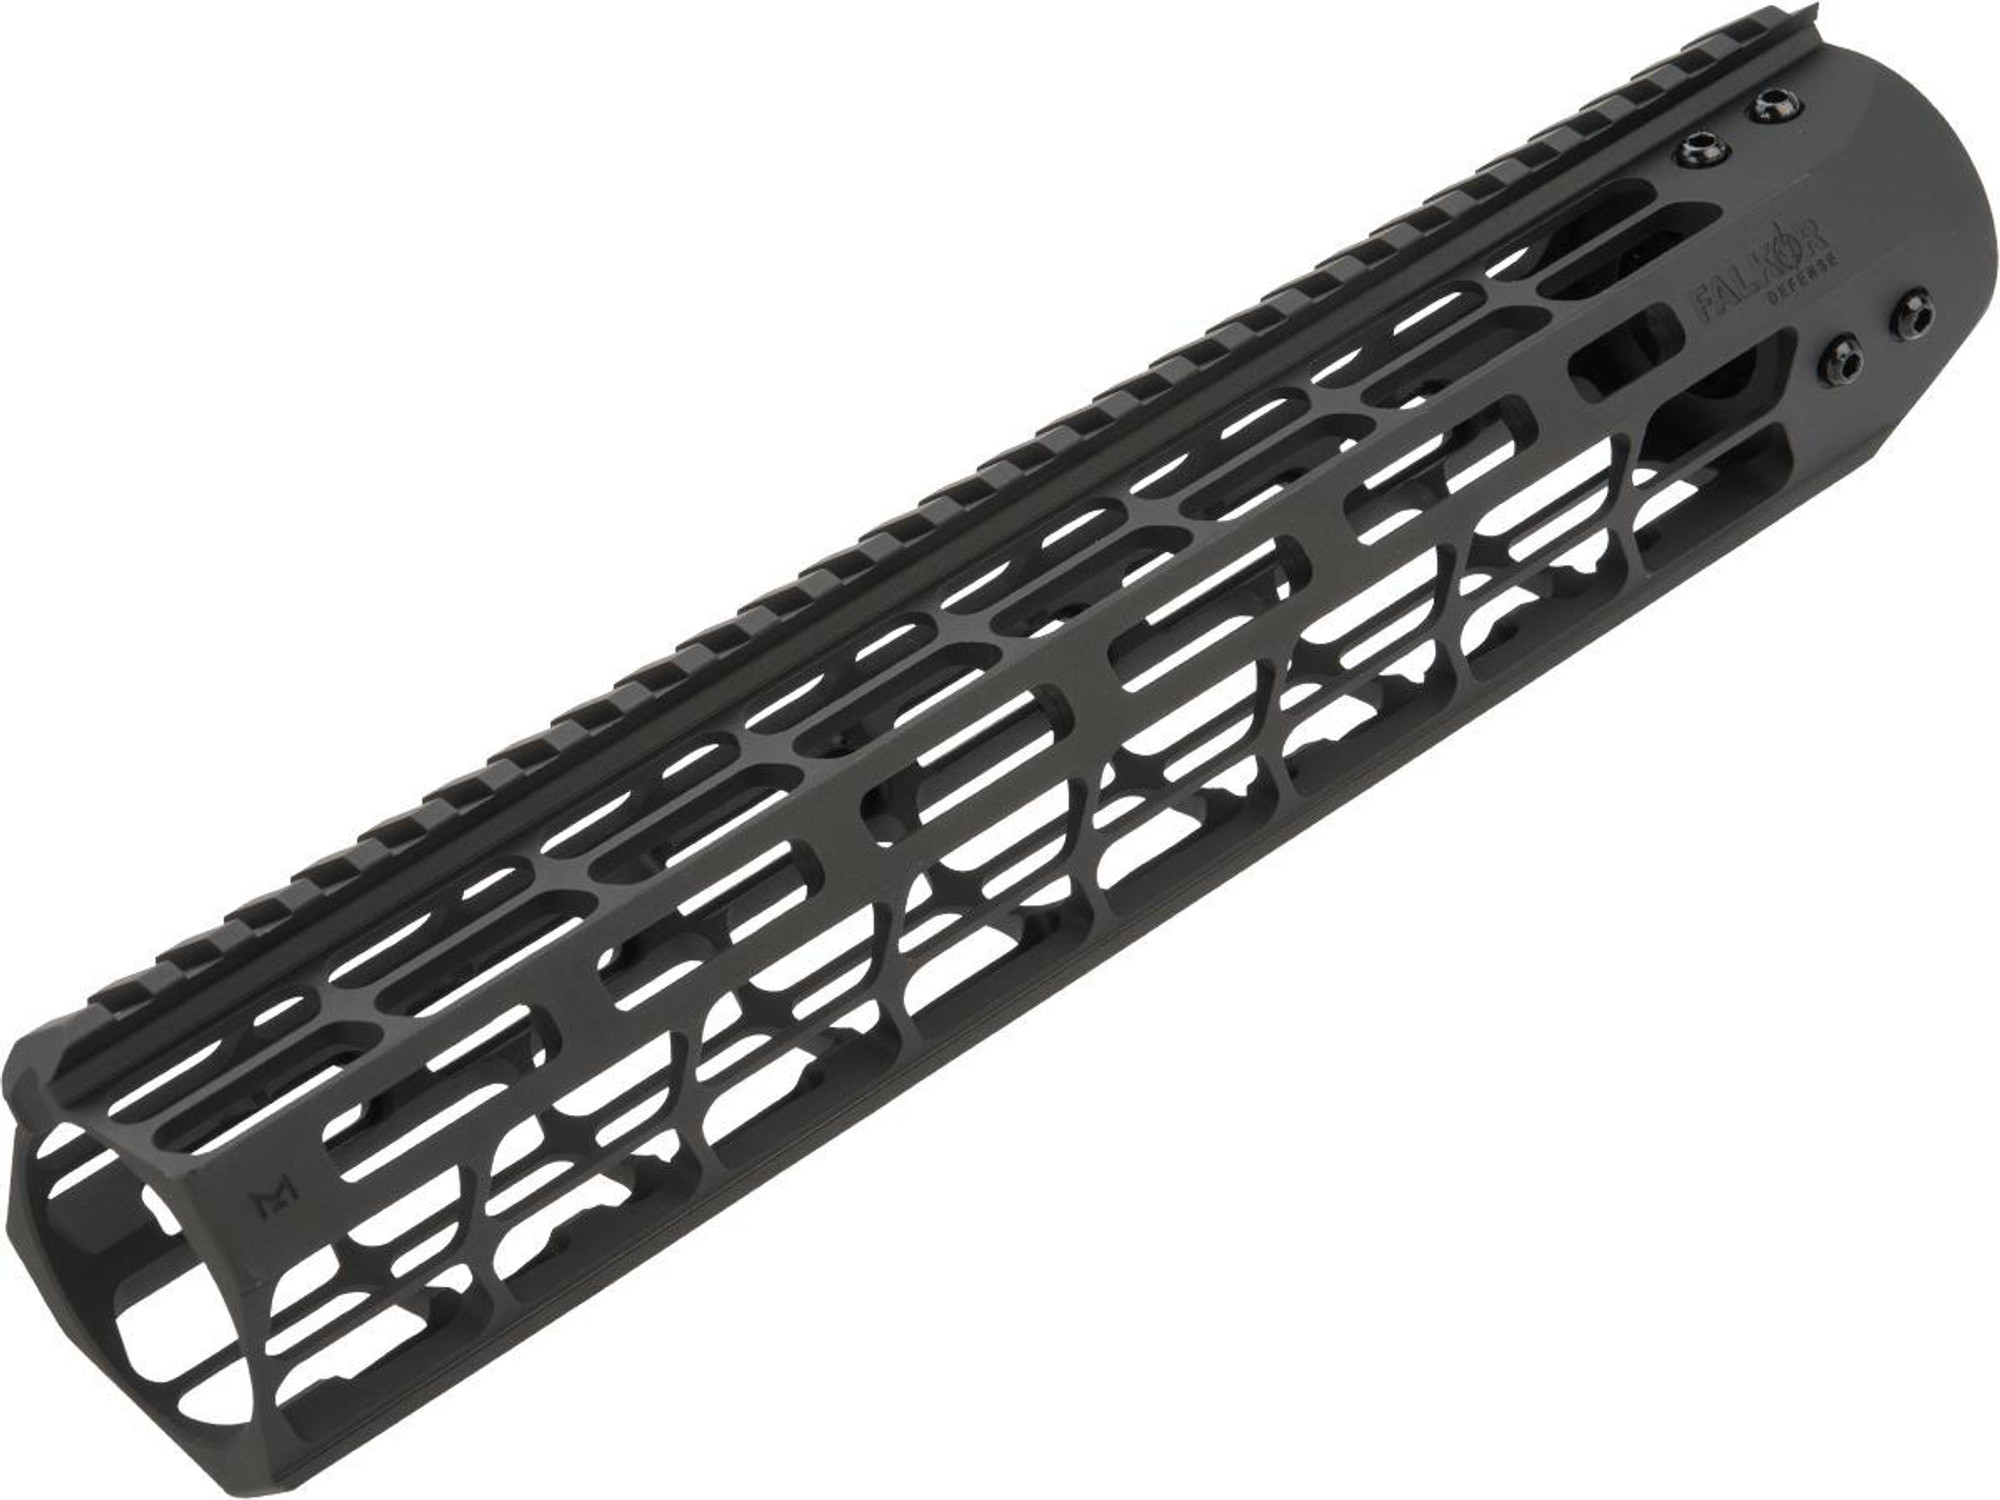 EMG Falkor Officially Licensed M-LOK Handguard for M4/M16 Series Airsoft AEGs (Color: 11.5" Fatty / Black)